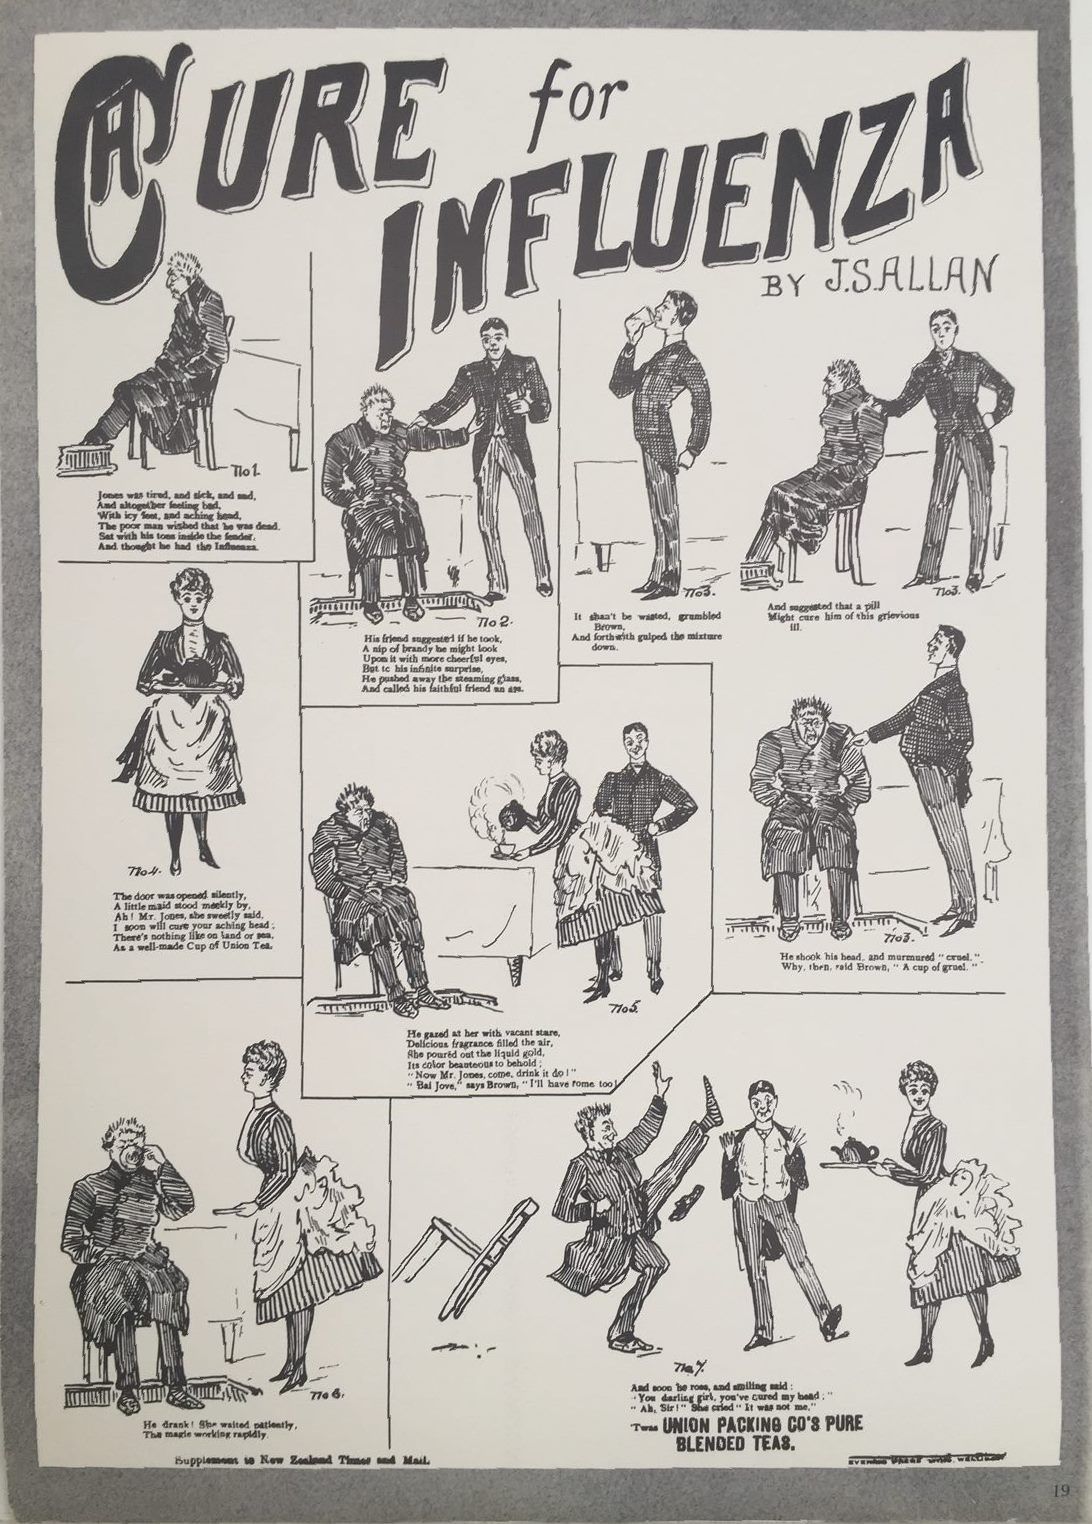 VINTAGE POSTER: Cure for Influenza 1890